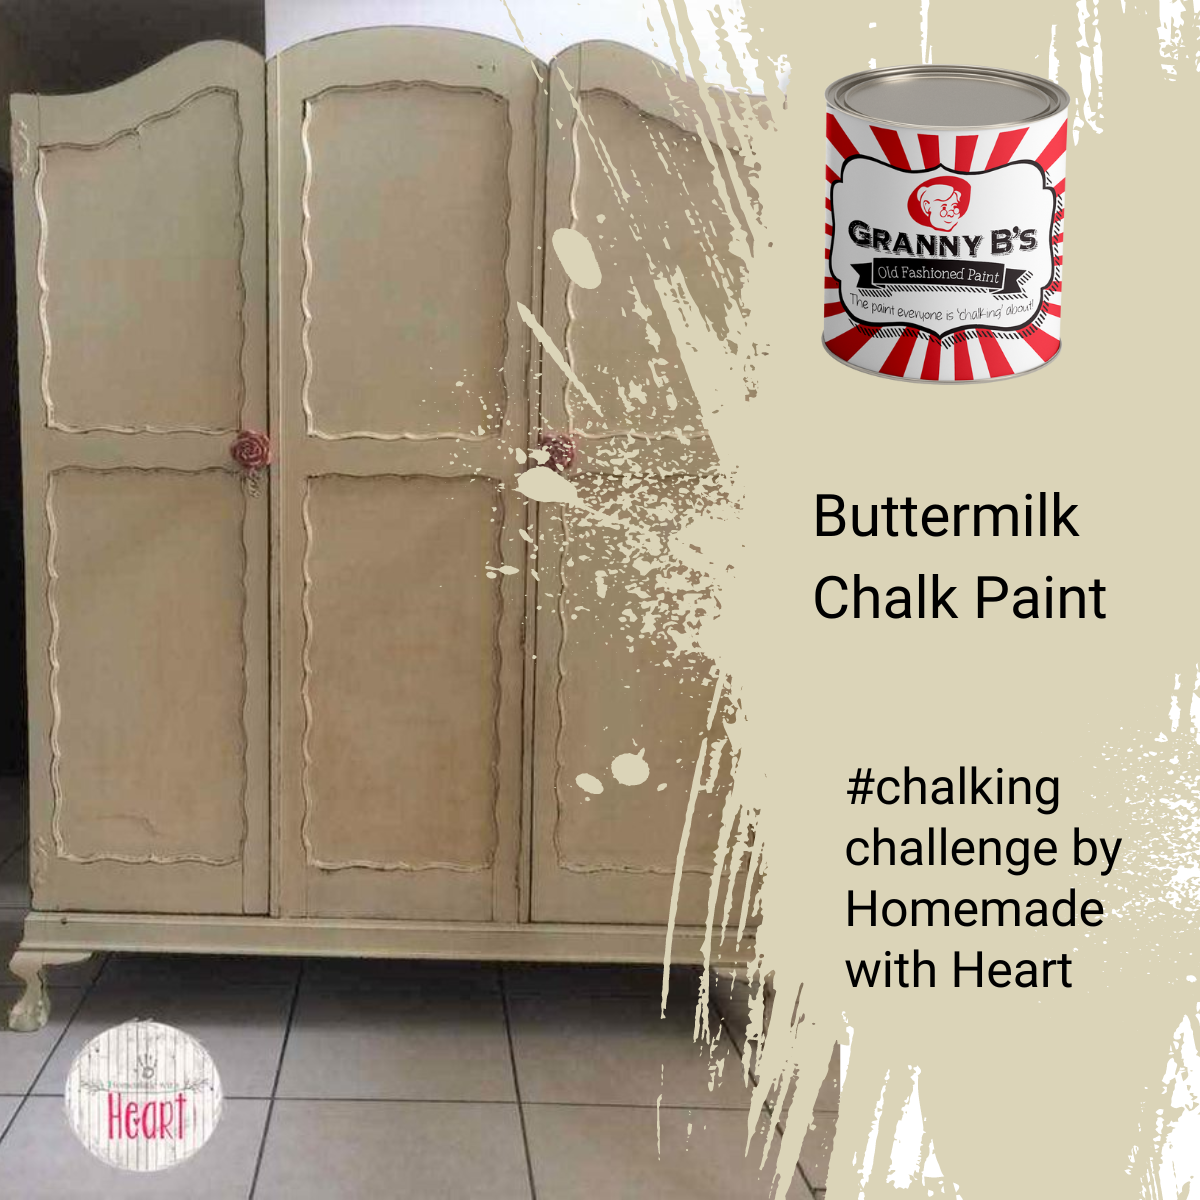 Old Fashioned Paint - Buttermilk (Pale Yellow) - Granny B's Old Fashioned Paint